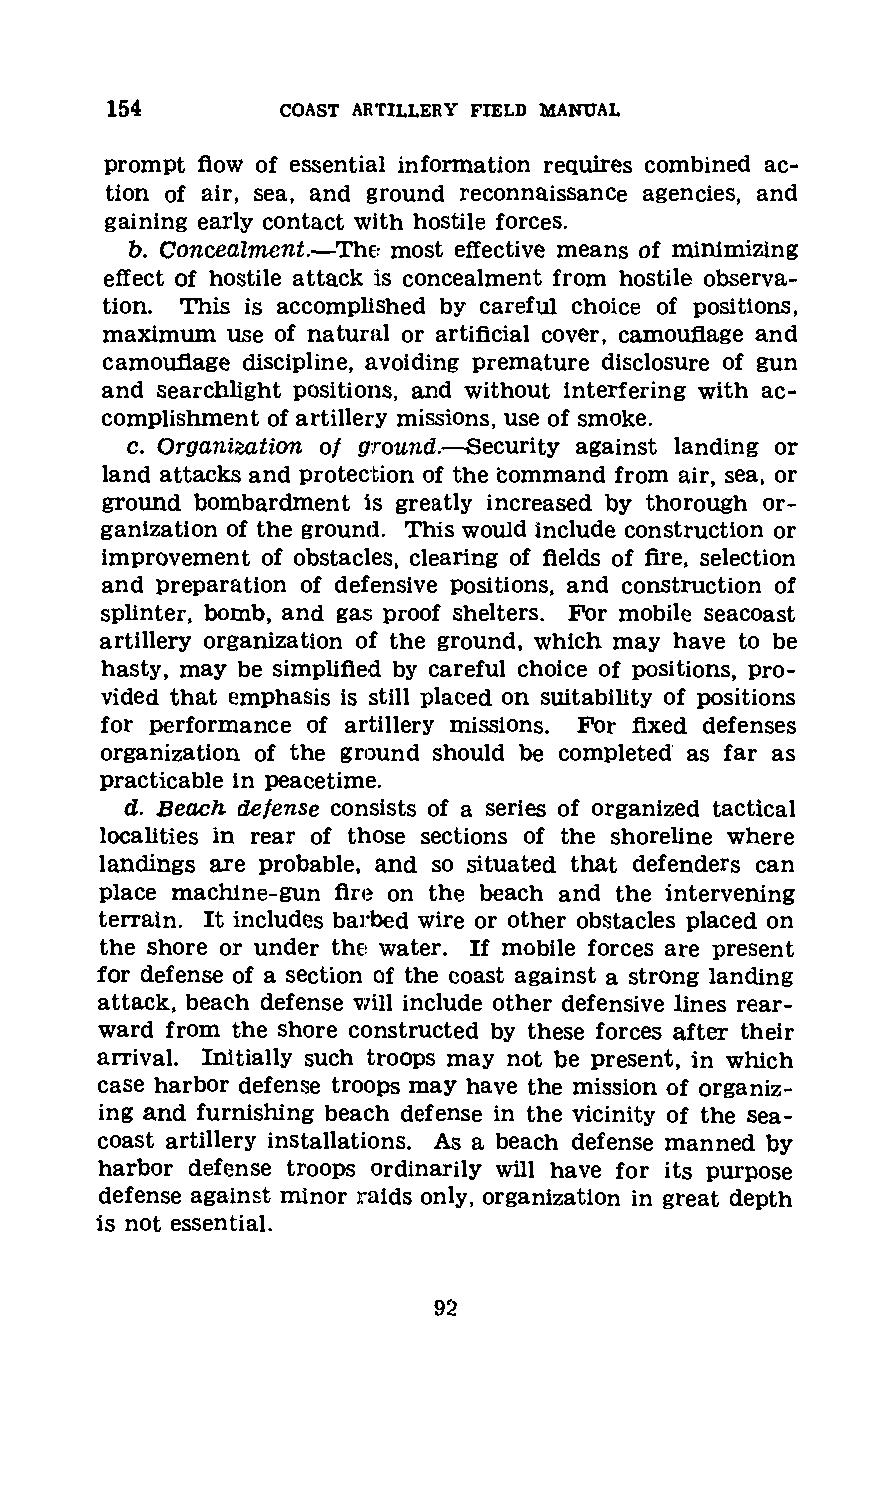 154 COAST ARTILLERY FIELD MANUAL prompt flow of essential information requires combined action of air, sea, and ground reconnaissance agencies, and gaining early contact with hostile forces. b.